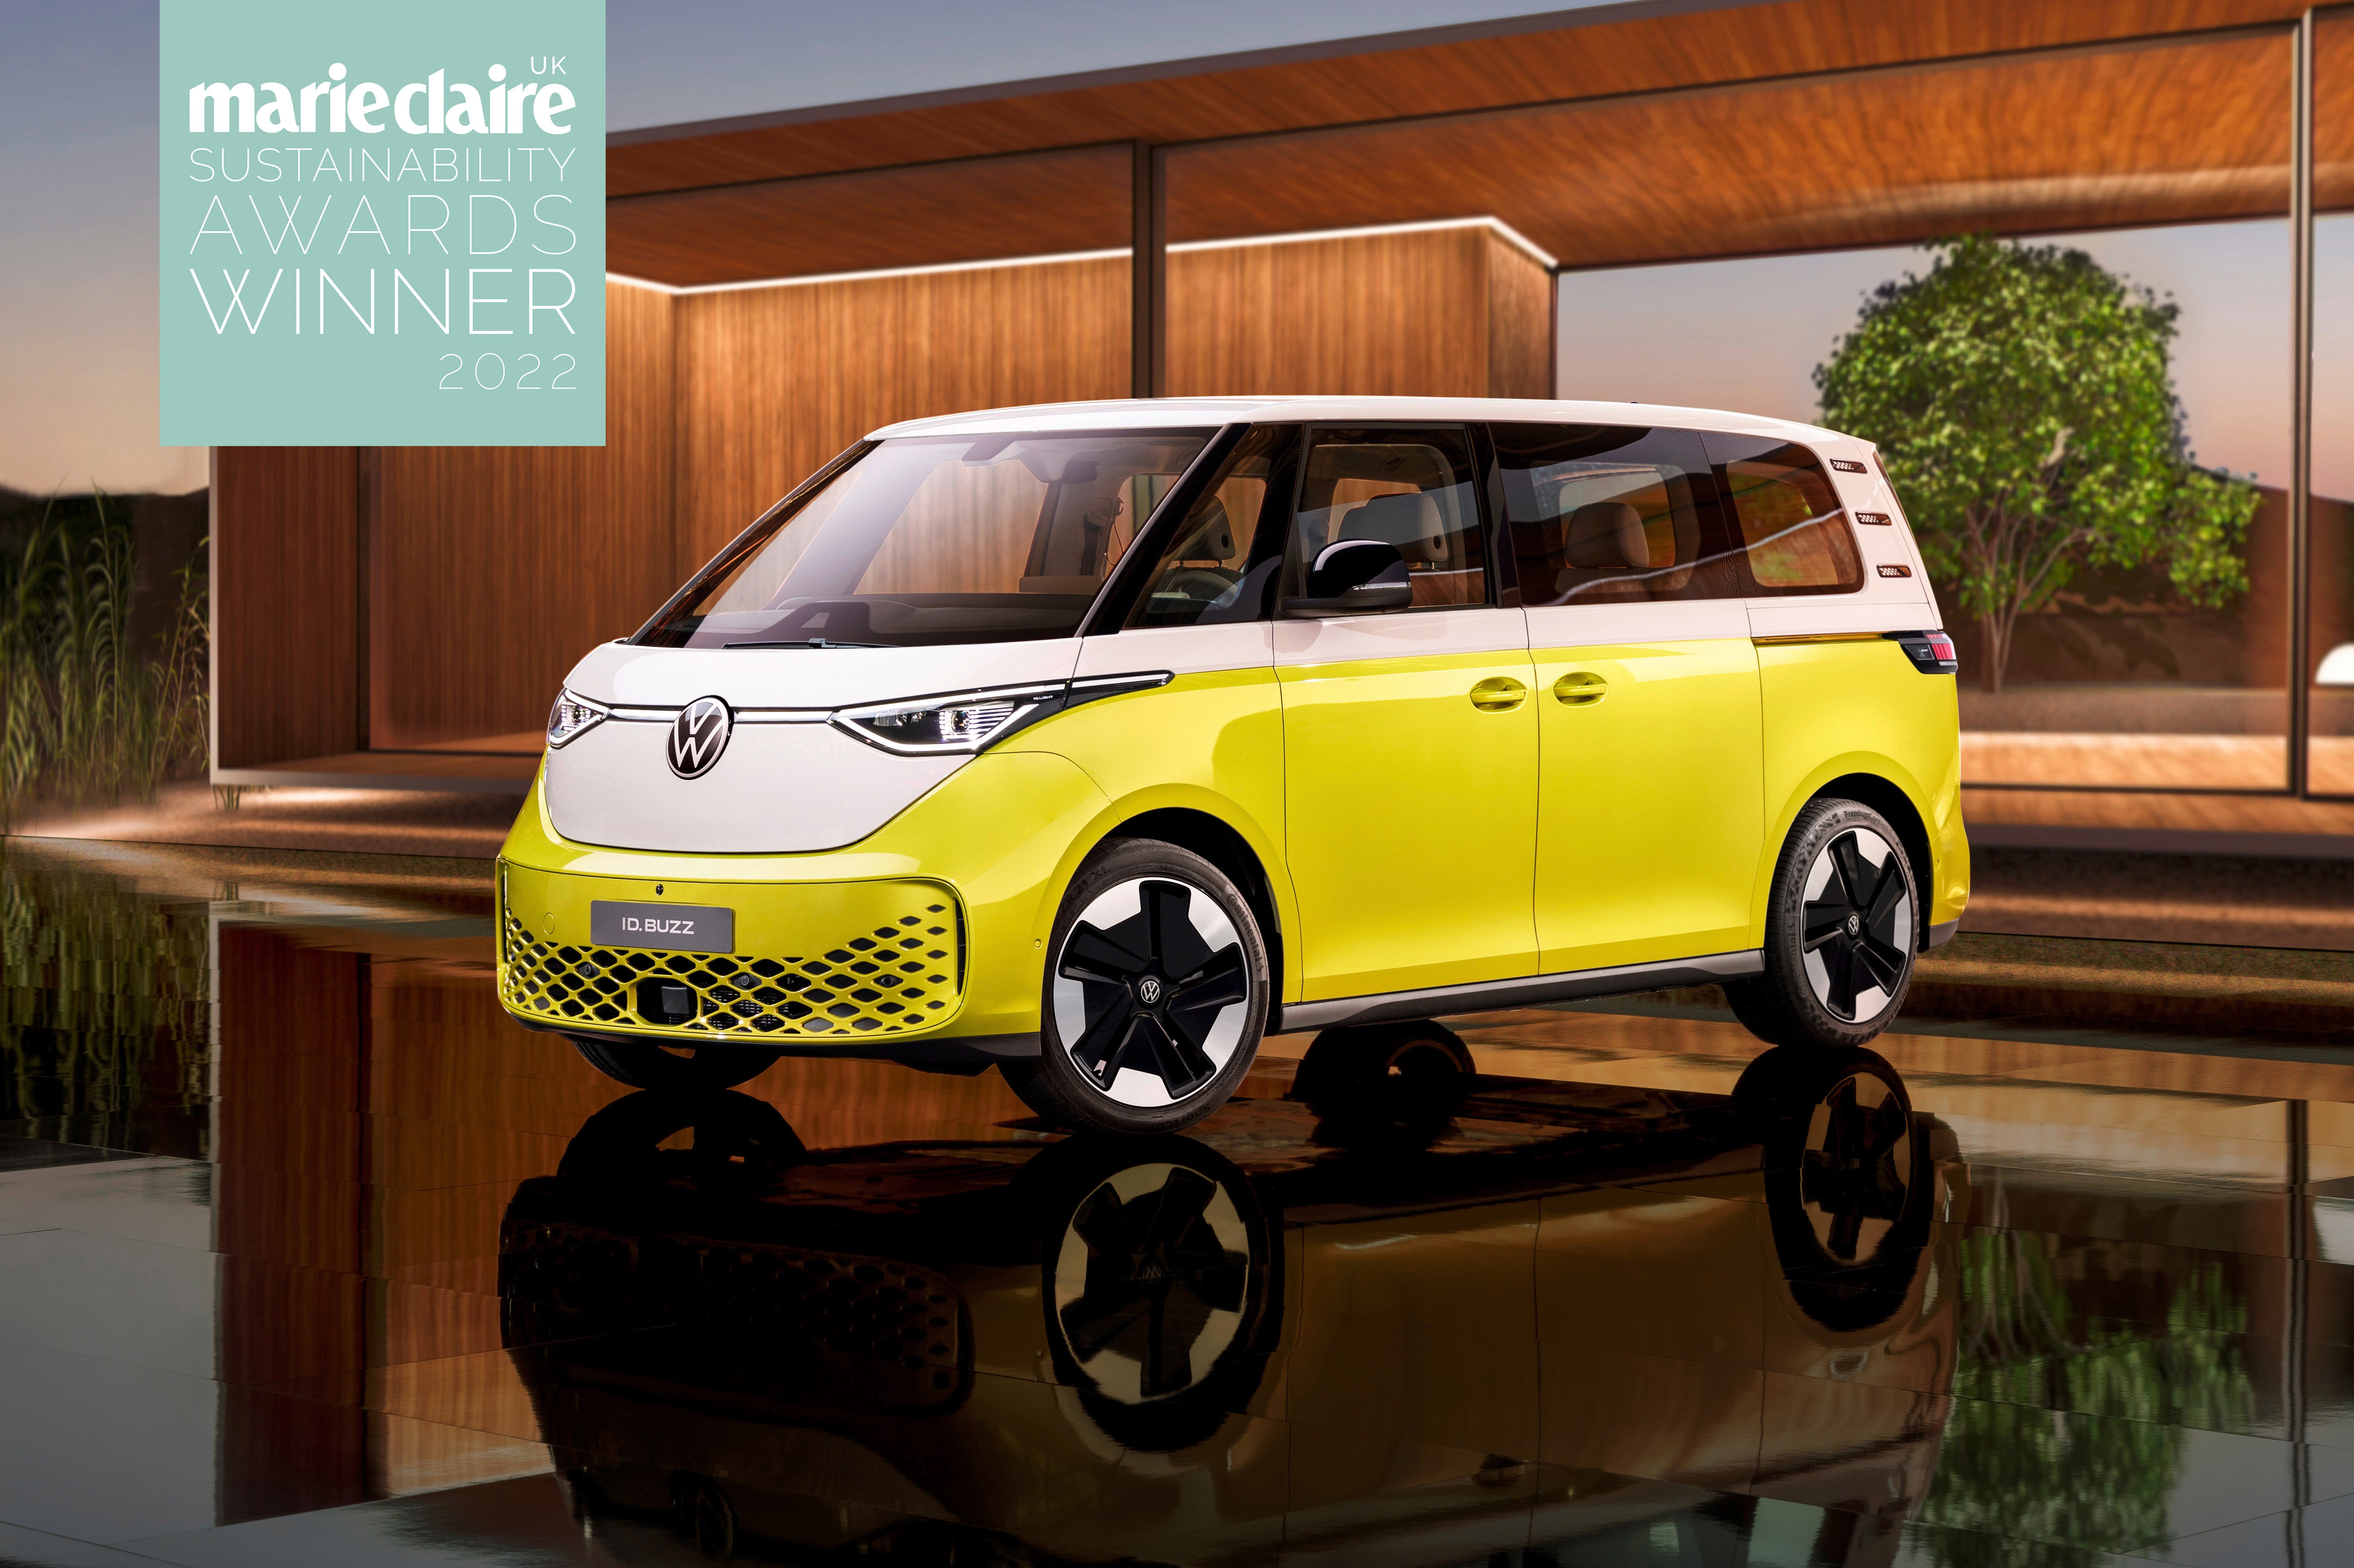 ID. Buzz crowned Best Electric Car at Marie Claire Sustainability Awards 2022